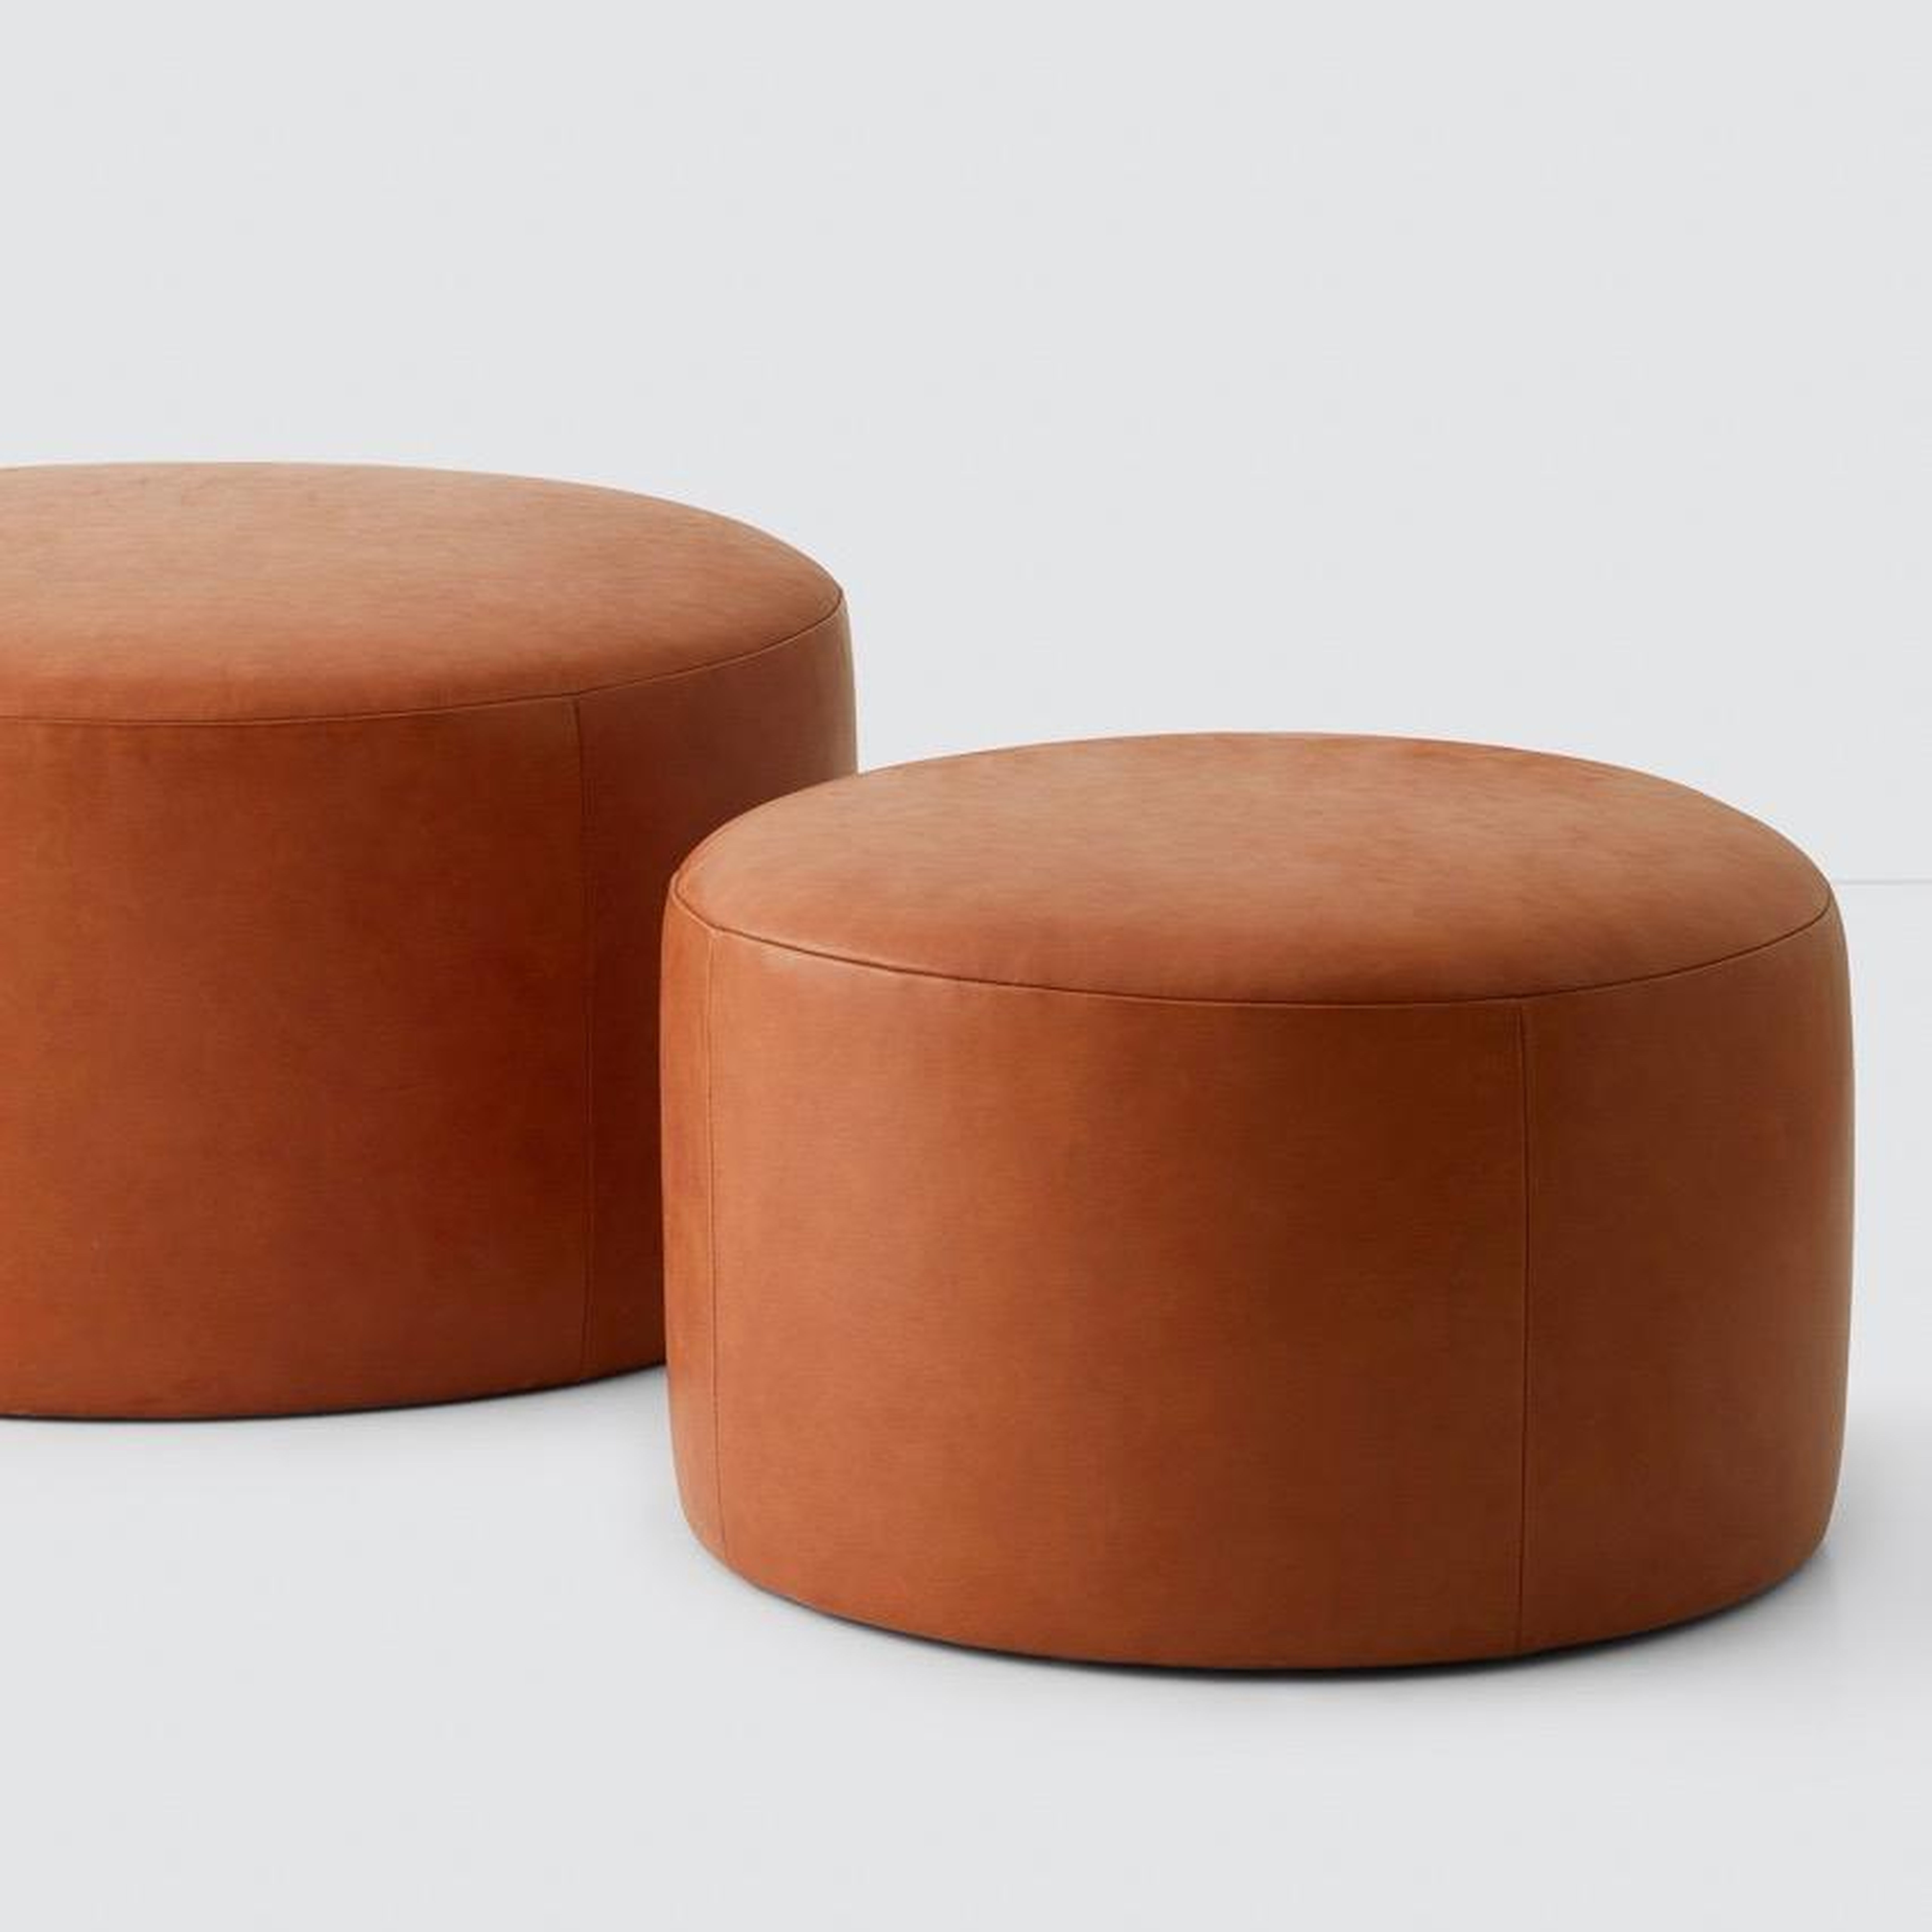 Torres Round Leather Ottoman - Medium & Large - Caramel By The Citizenry - The Citizenry